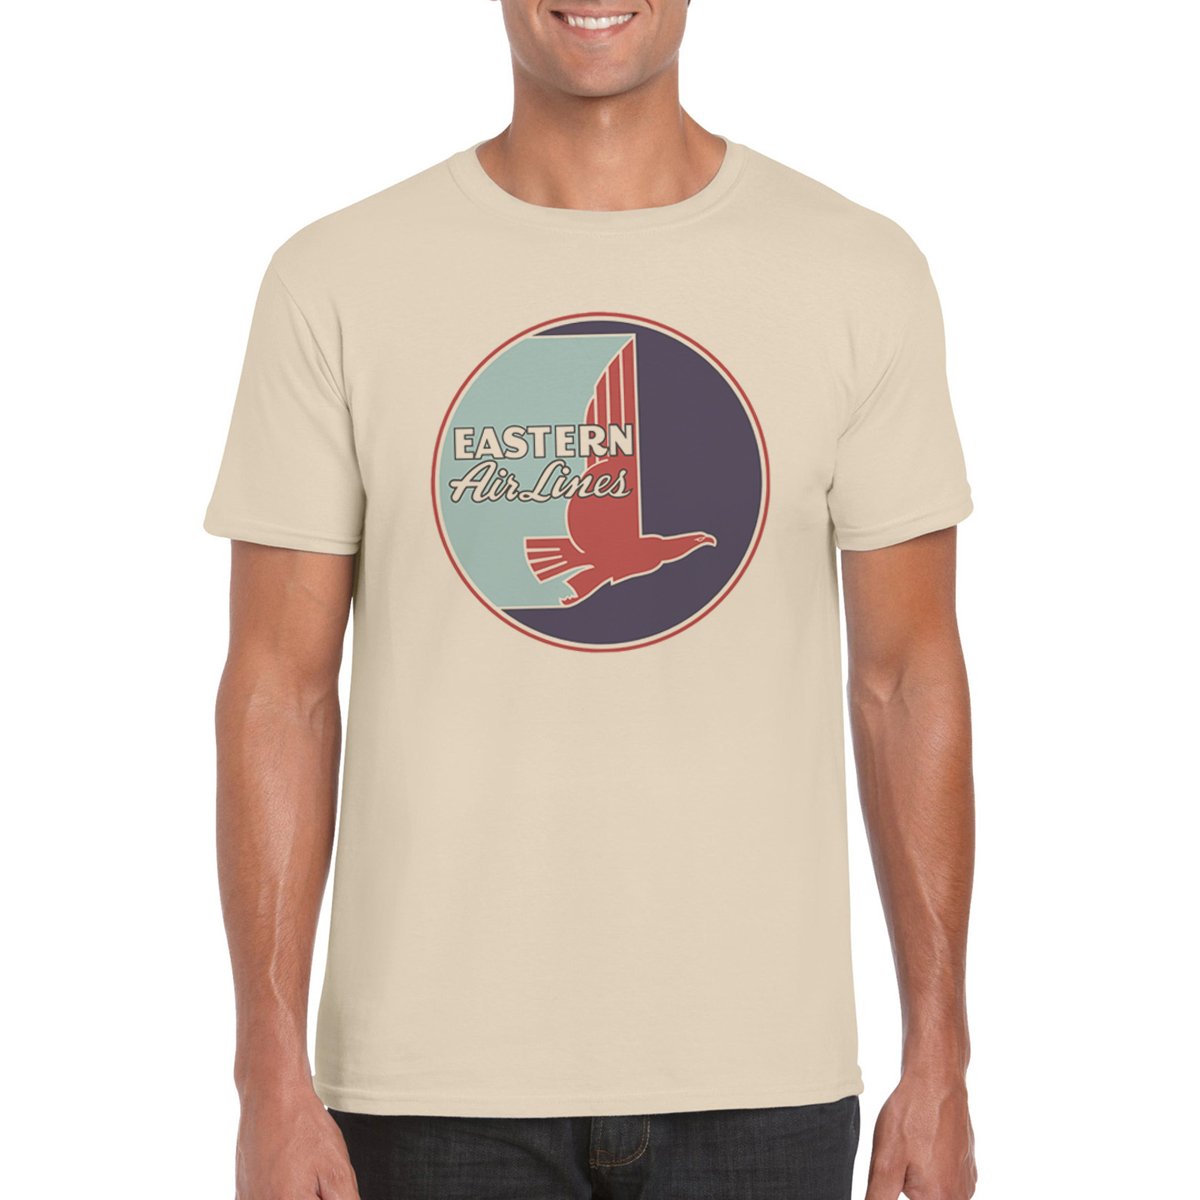 EASTERN AIRLINES LOGO T-Shirt